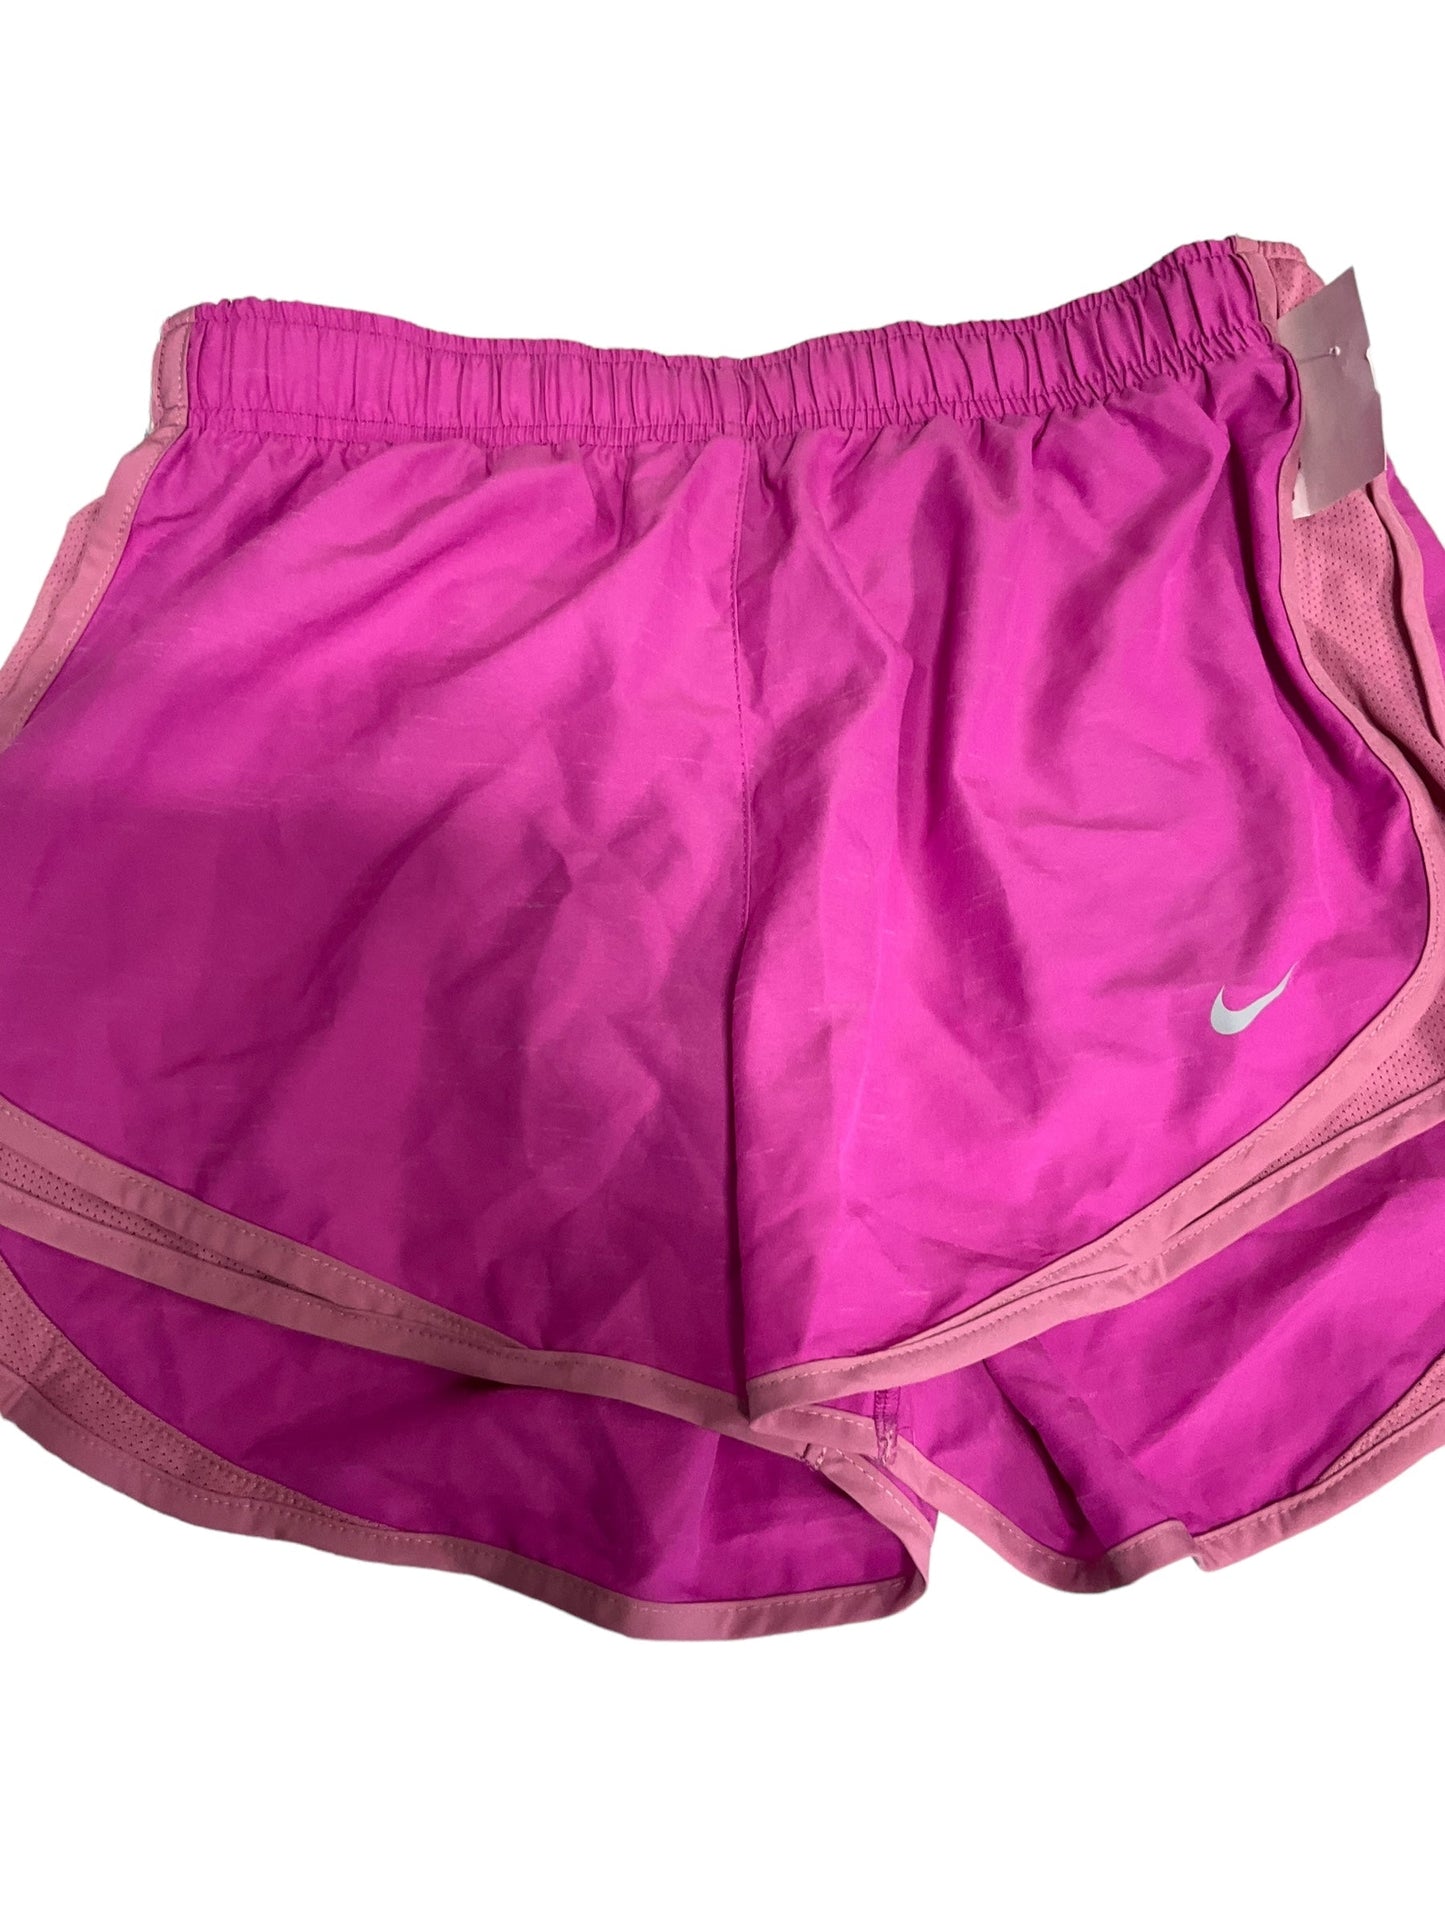 Pink Athletic Shorts Nike Apparel, Size M